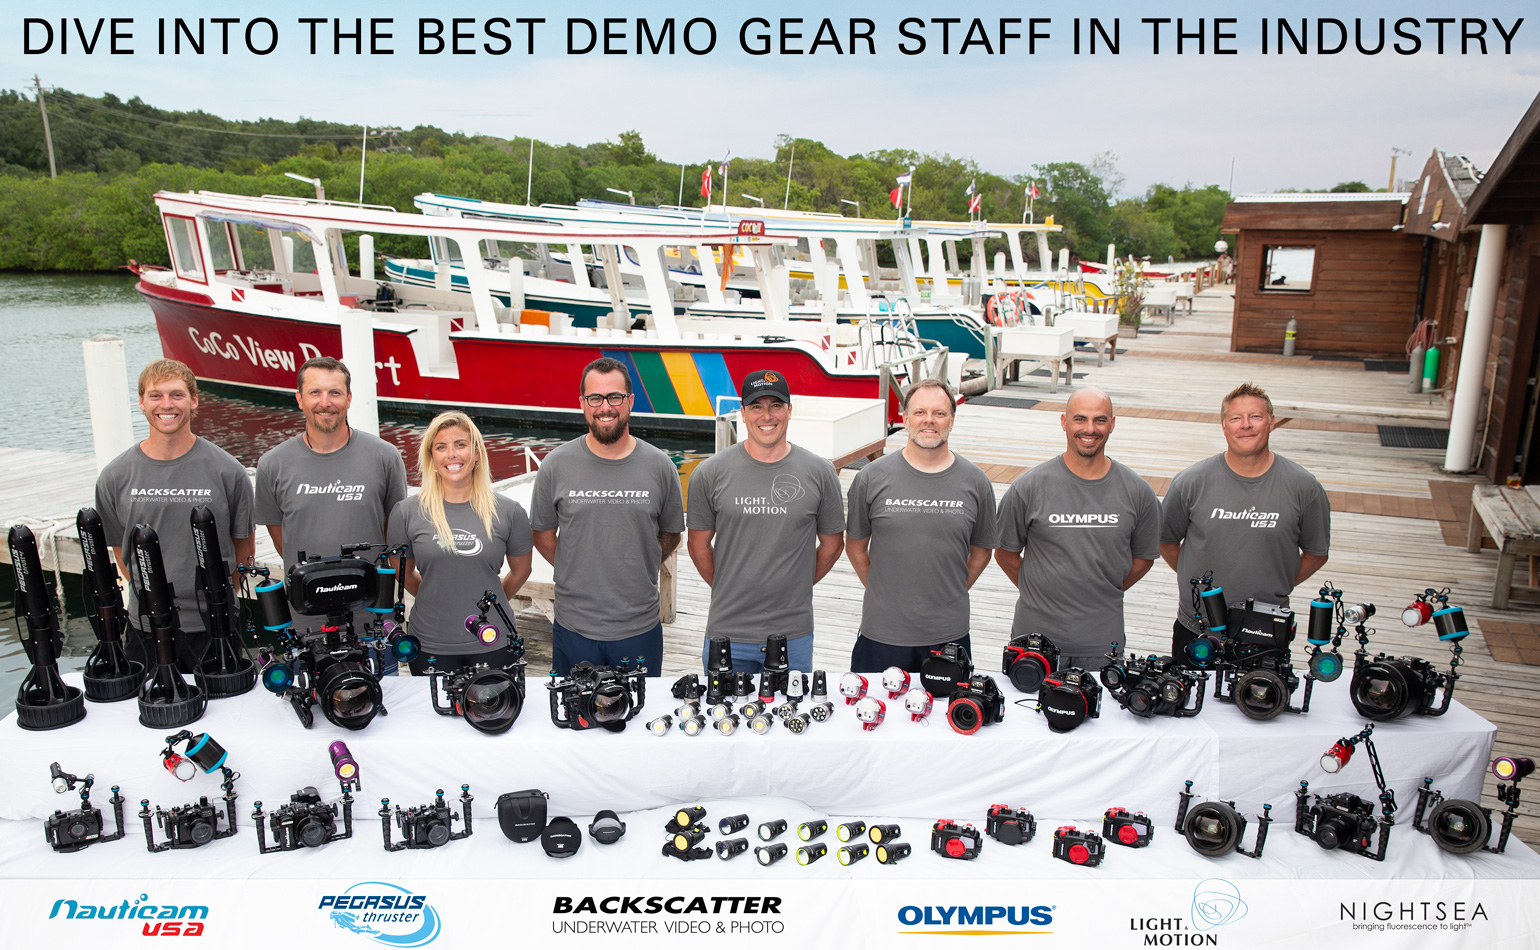 The Digitial Shootout Demo Gear and Tech Support Staff